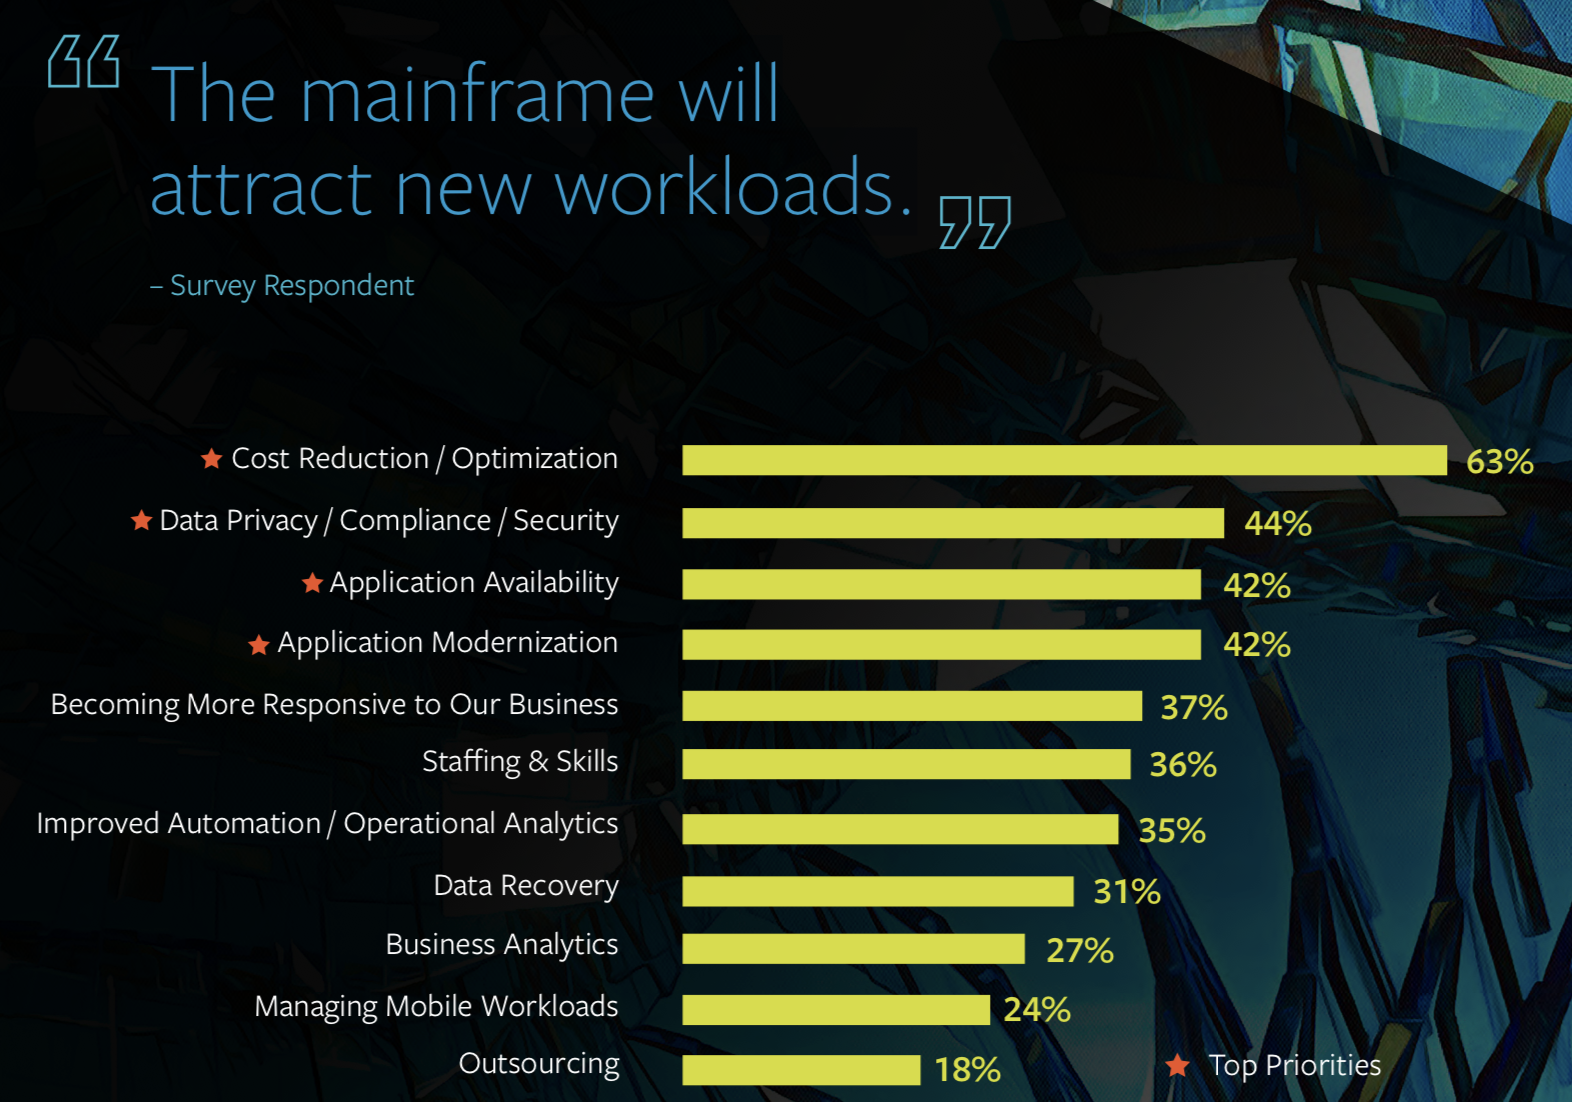 The mainframe will attract new workloads